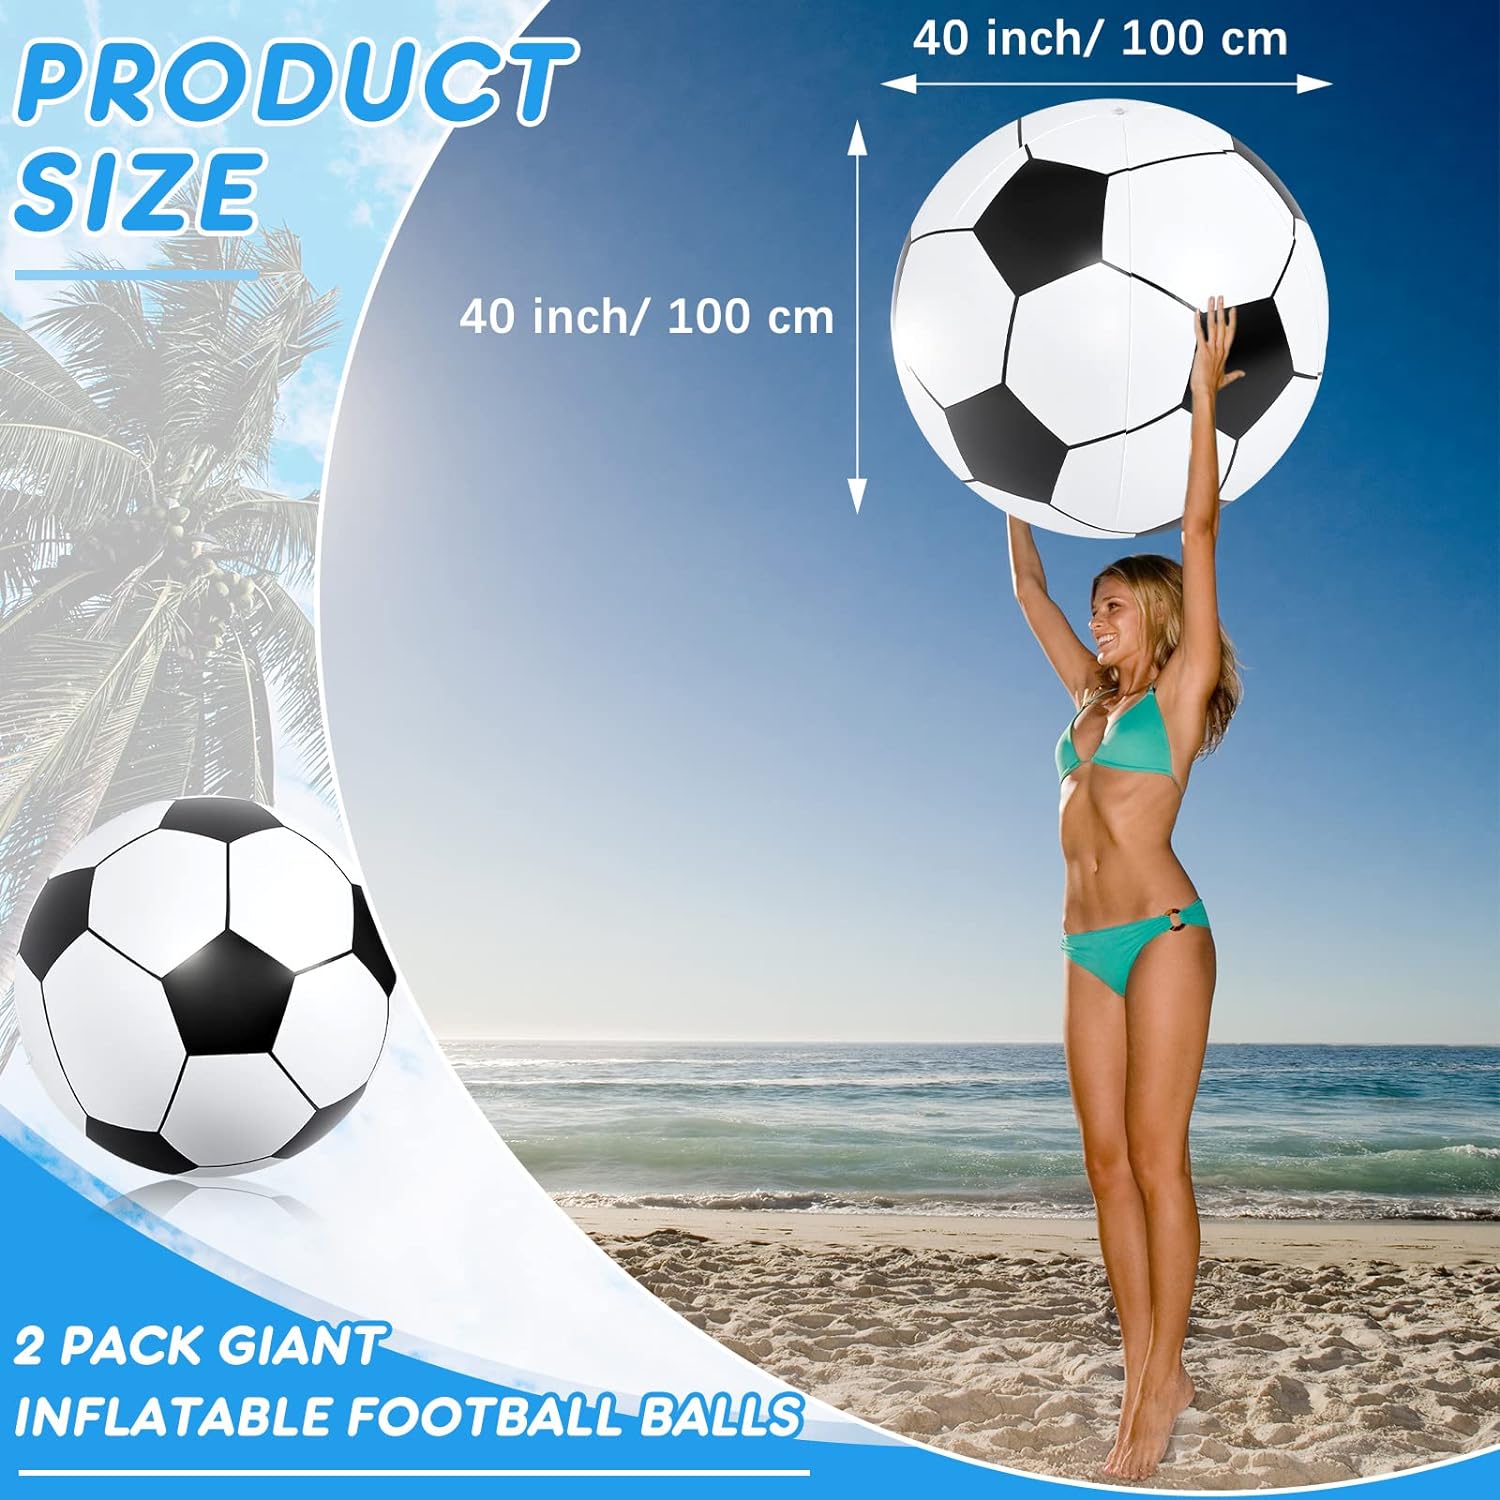 2 Pcs 3 Feet Giant Inflatable Soccer Ball Large Inflatable Football Inflatable Sports Balls Giant Beach Balls Beach Pool Party Toys for Outdoor Activity Games Sports Themed Birthday Party Decorations